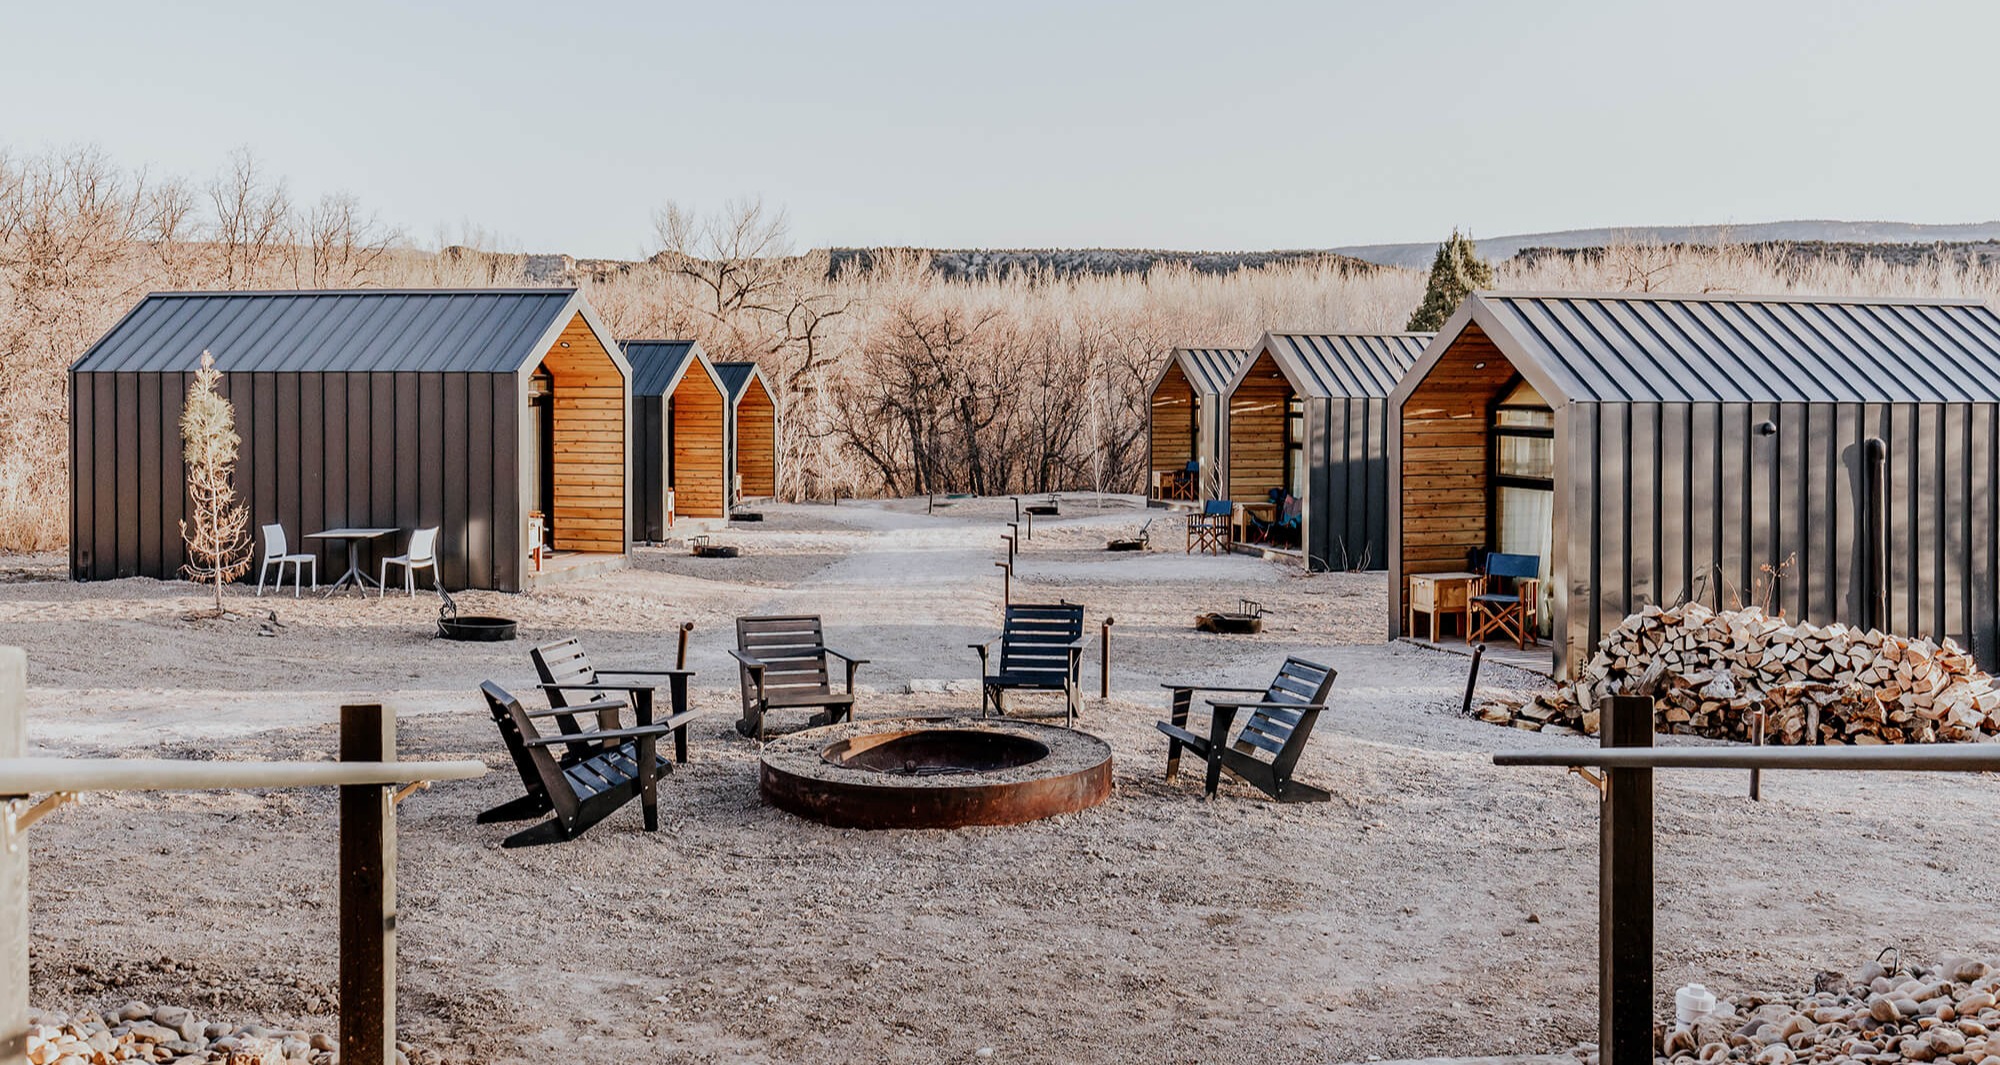 Yonder Escalante Cabins and Communal Firepit